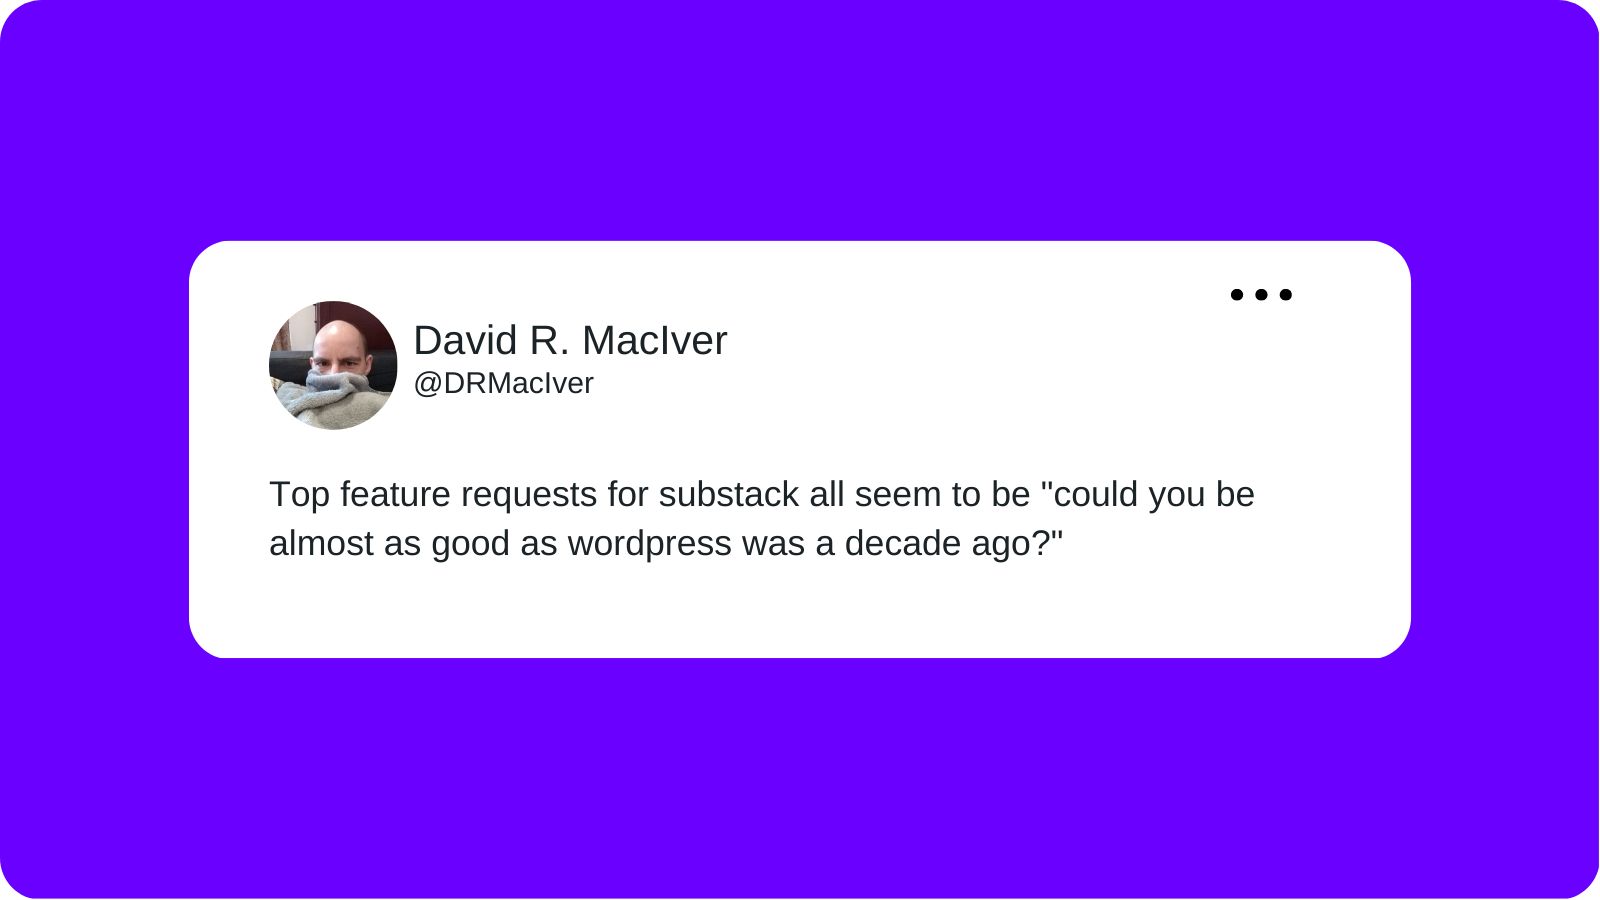 A tweet from David R. MacIver layered over a purple background that reads "Top feature requests for substack all seem to be "could you be almost as good as wordpress was a decade ago?"